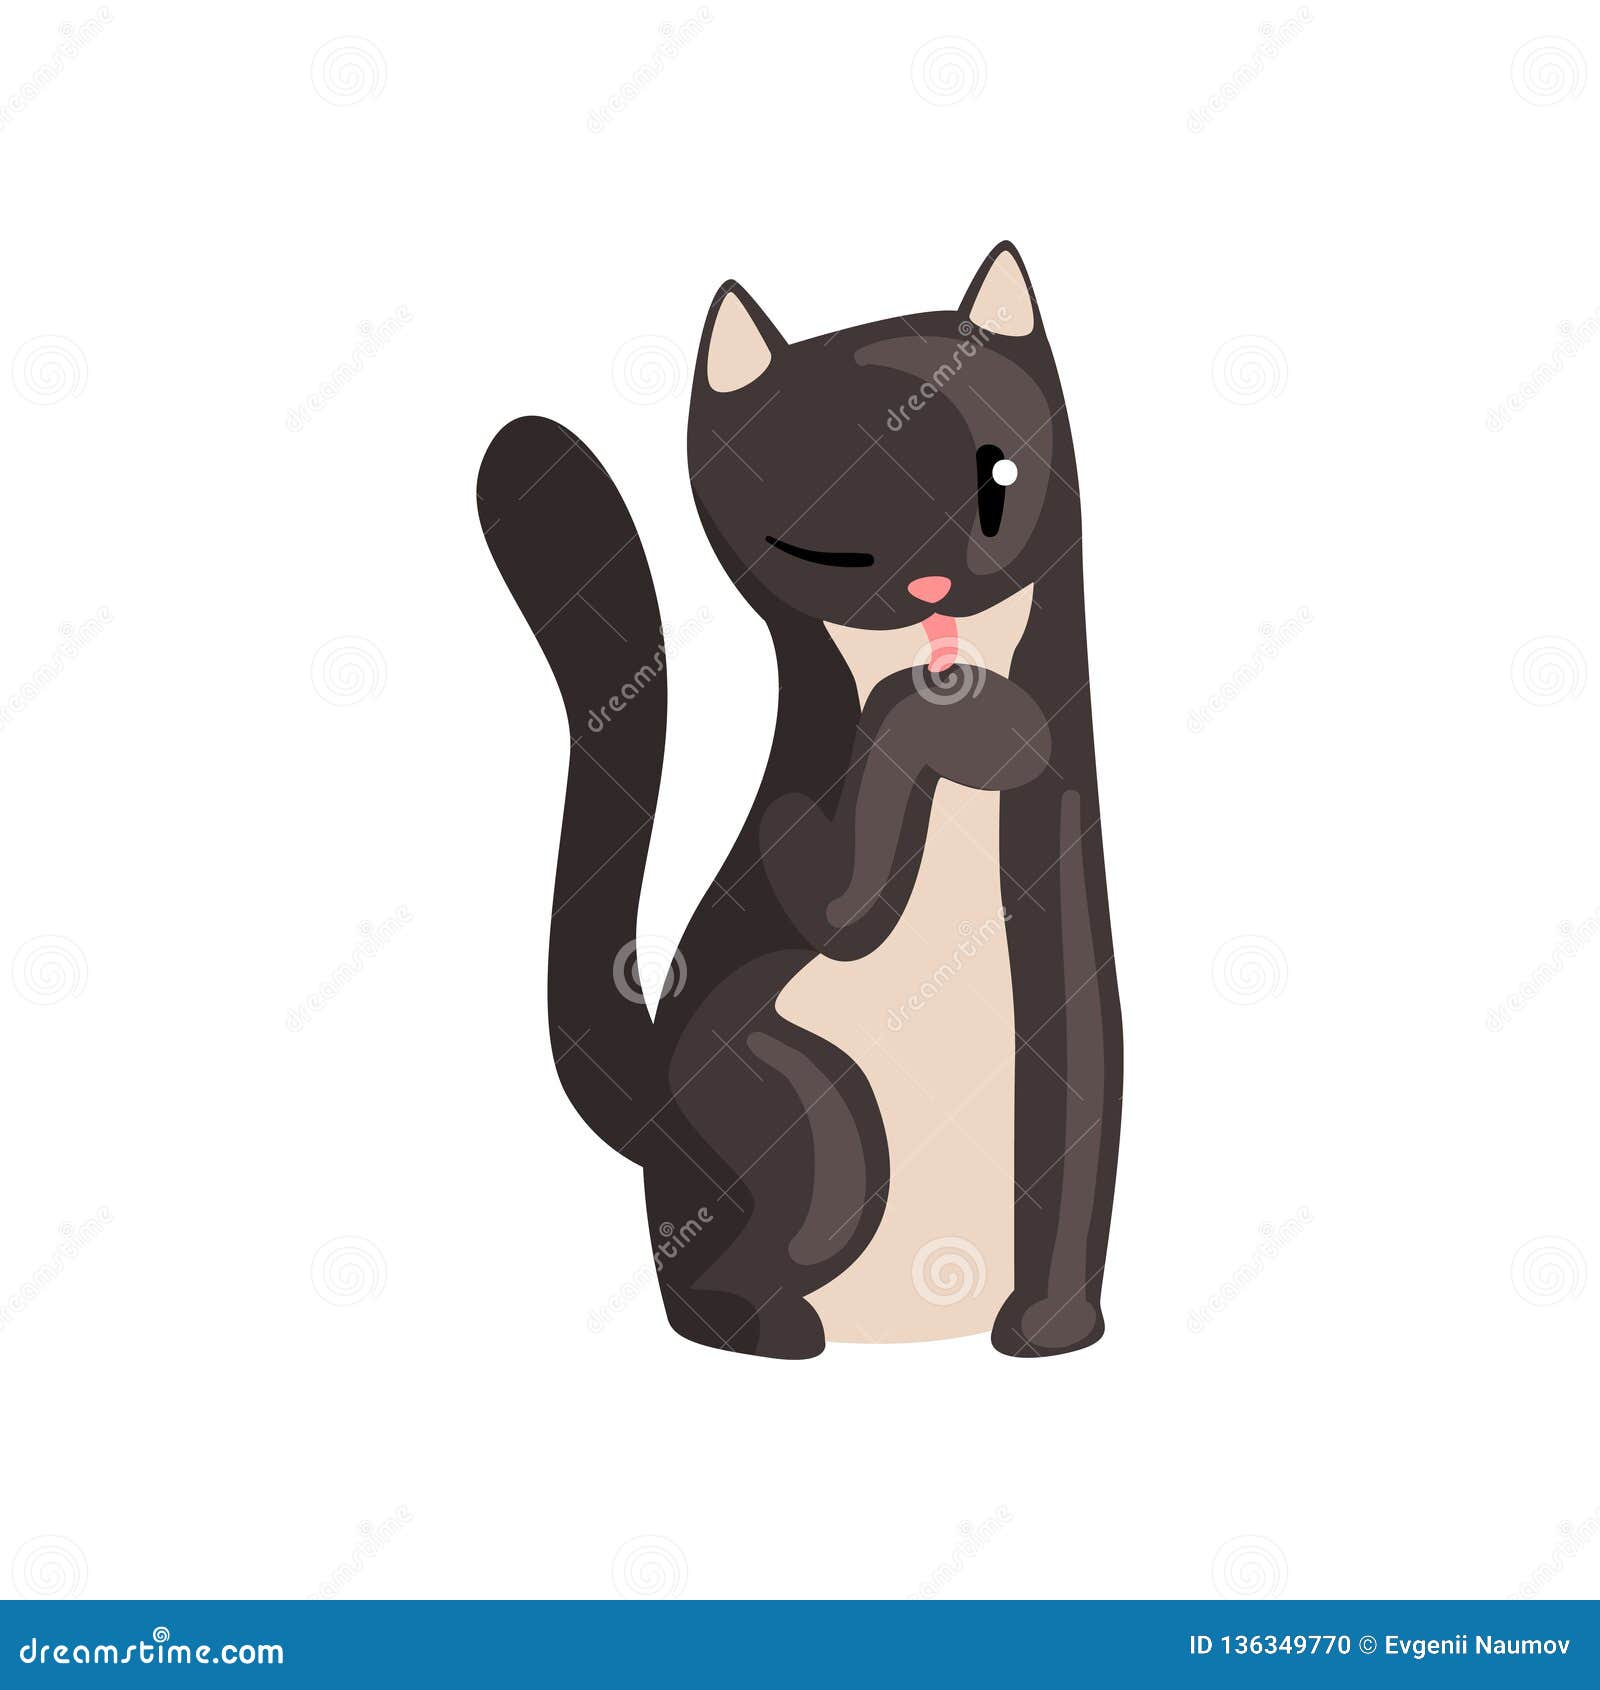 Cute Black Cat, Funny Pet Character, Furry Human Friend Vector Illustration  Stock Vector - Illustration of character, graphic: 136349770